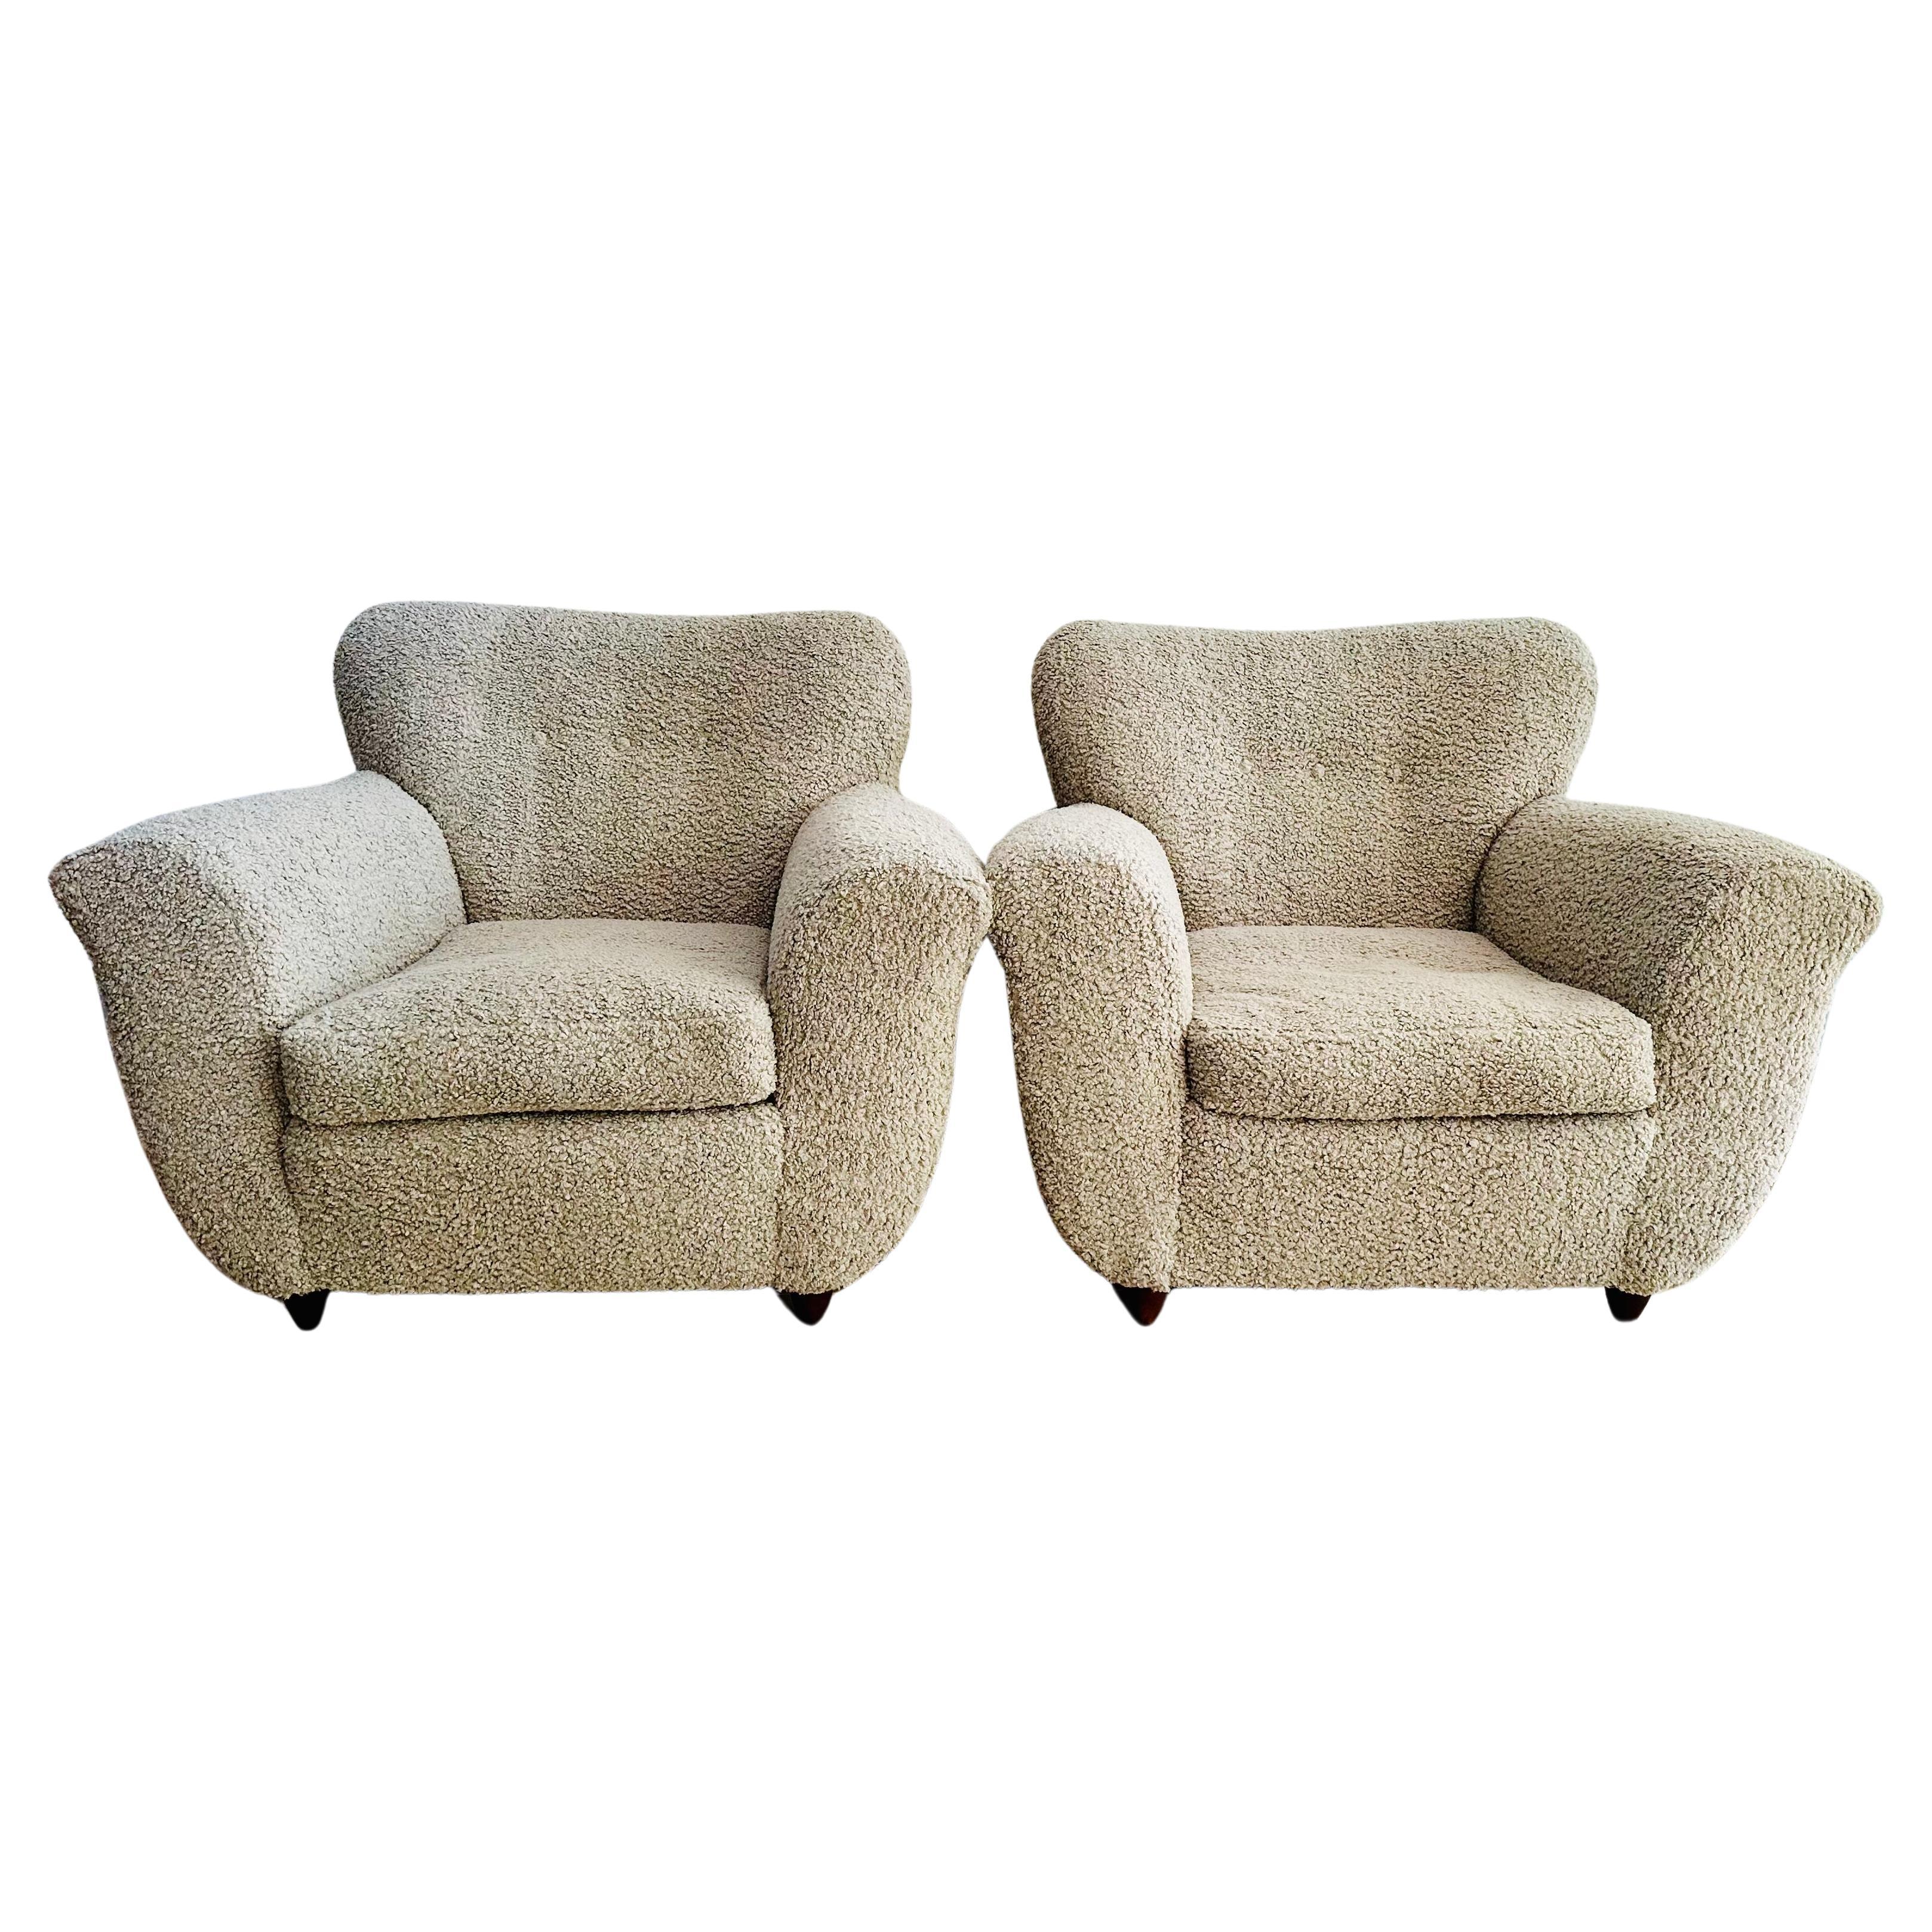 Pair of 1940s Large Italian Newly Upholstered Silver Grey Bouclé Armchairs